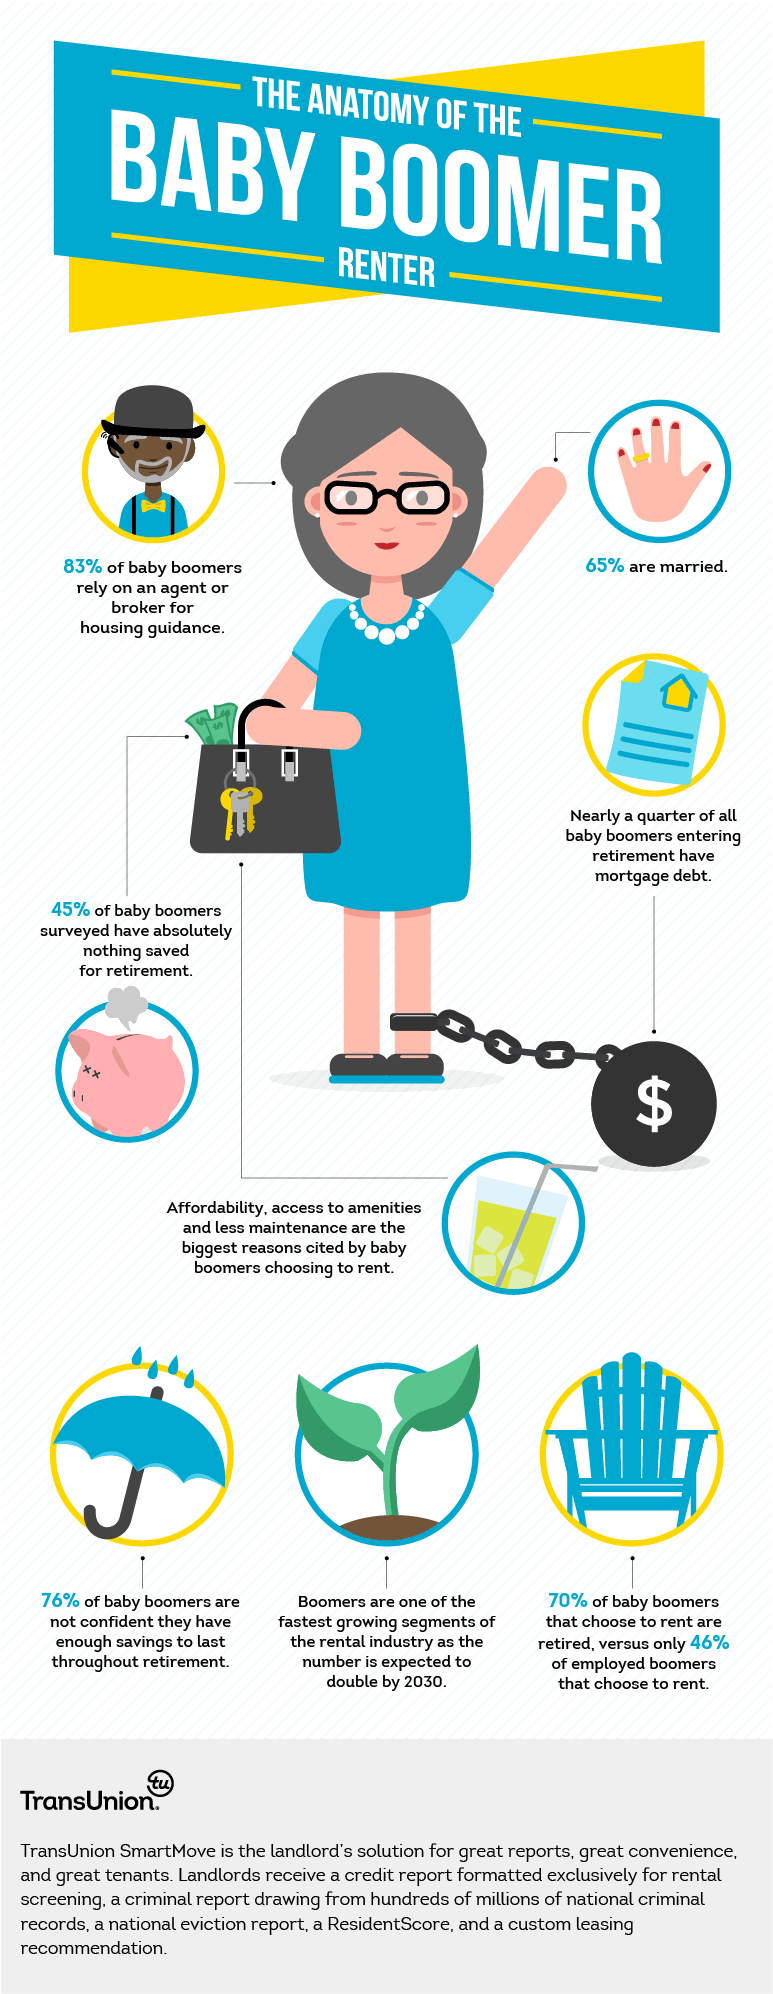 The Anatomy Of A Baby Boomer Renter [INFOGRAPHIC] | SmartMove